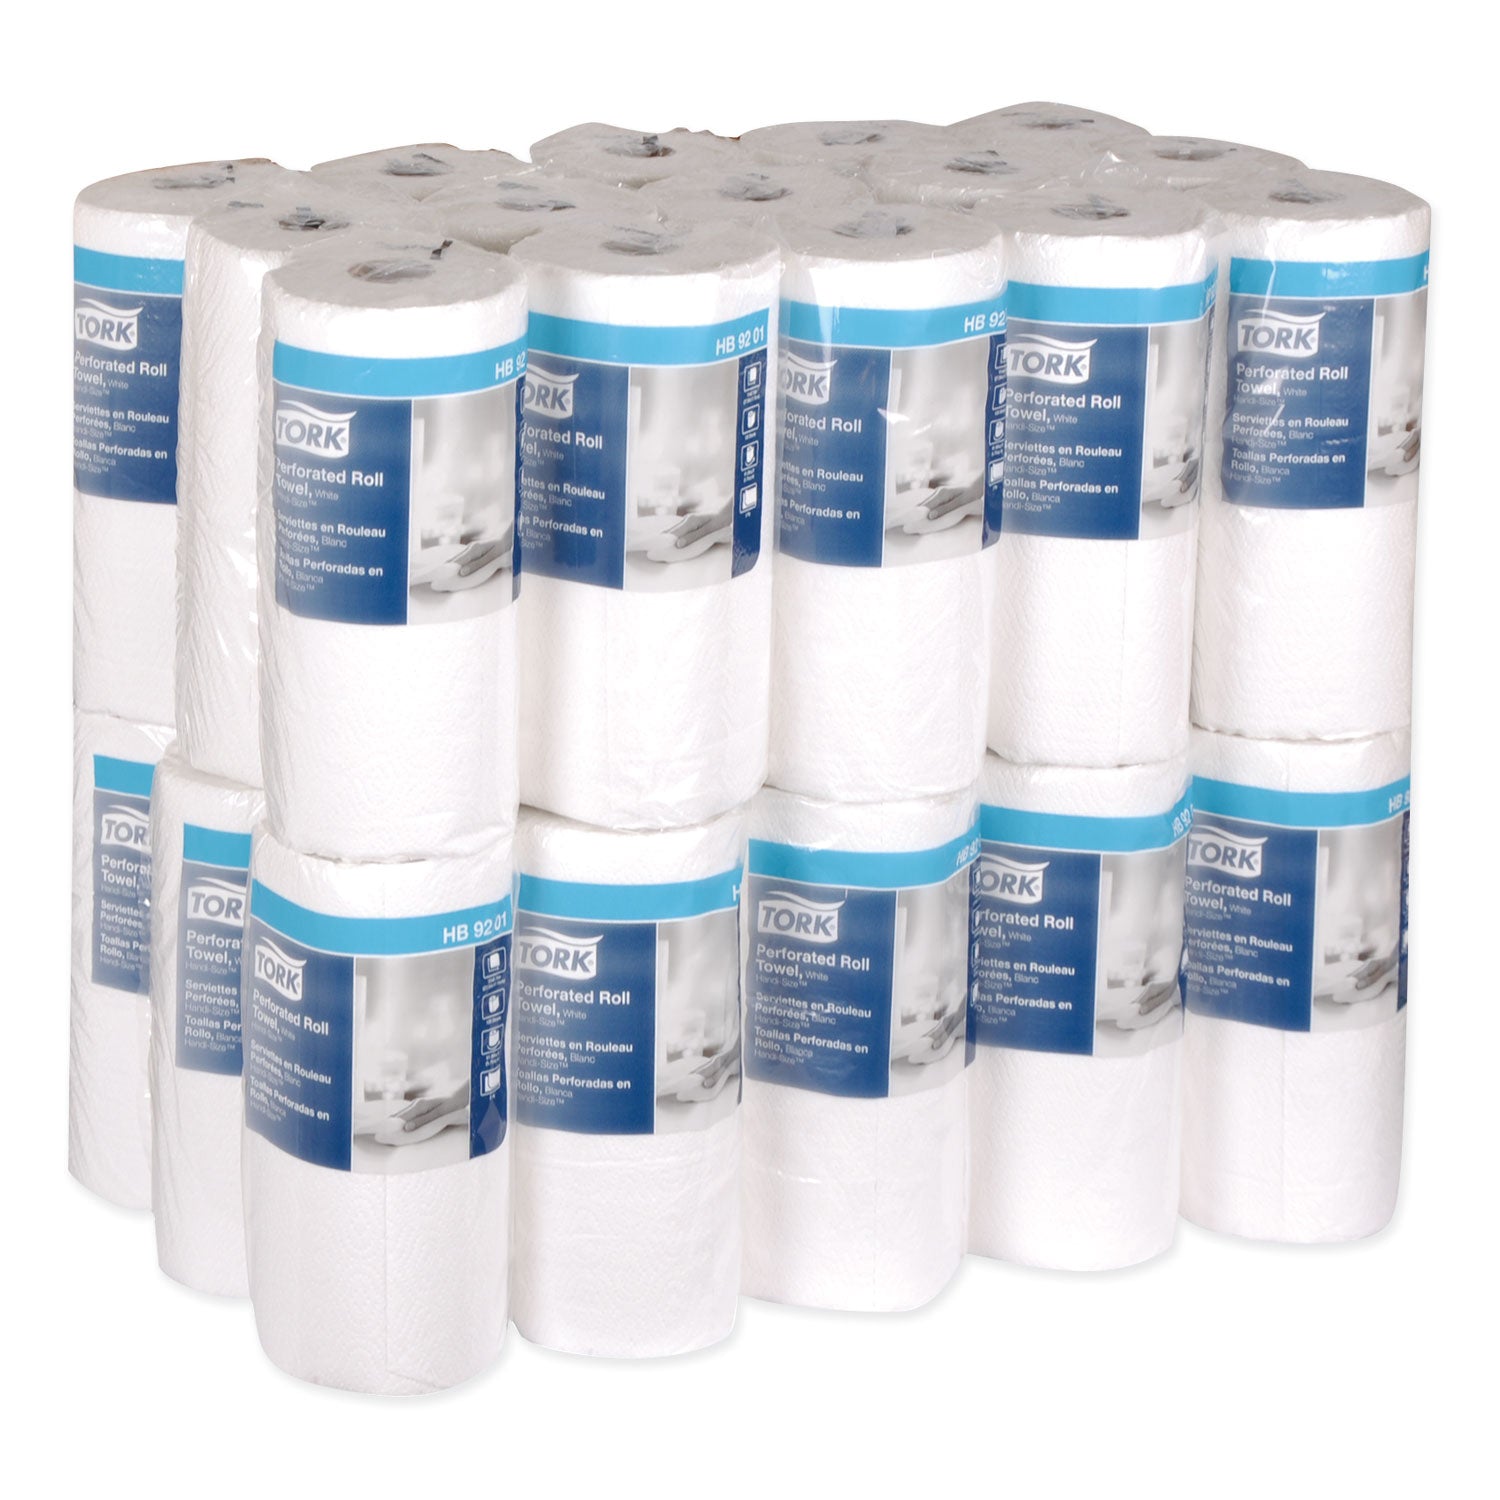 handi-size-perforated-kitchen-roll-towel-2-ply-11-x-675-white-120-roll-30-carton_trkhb9201 - 8